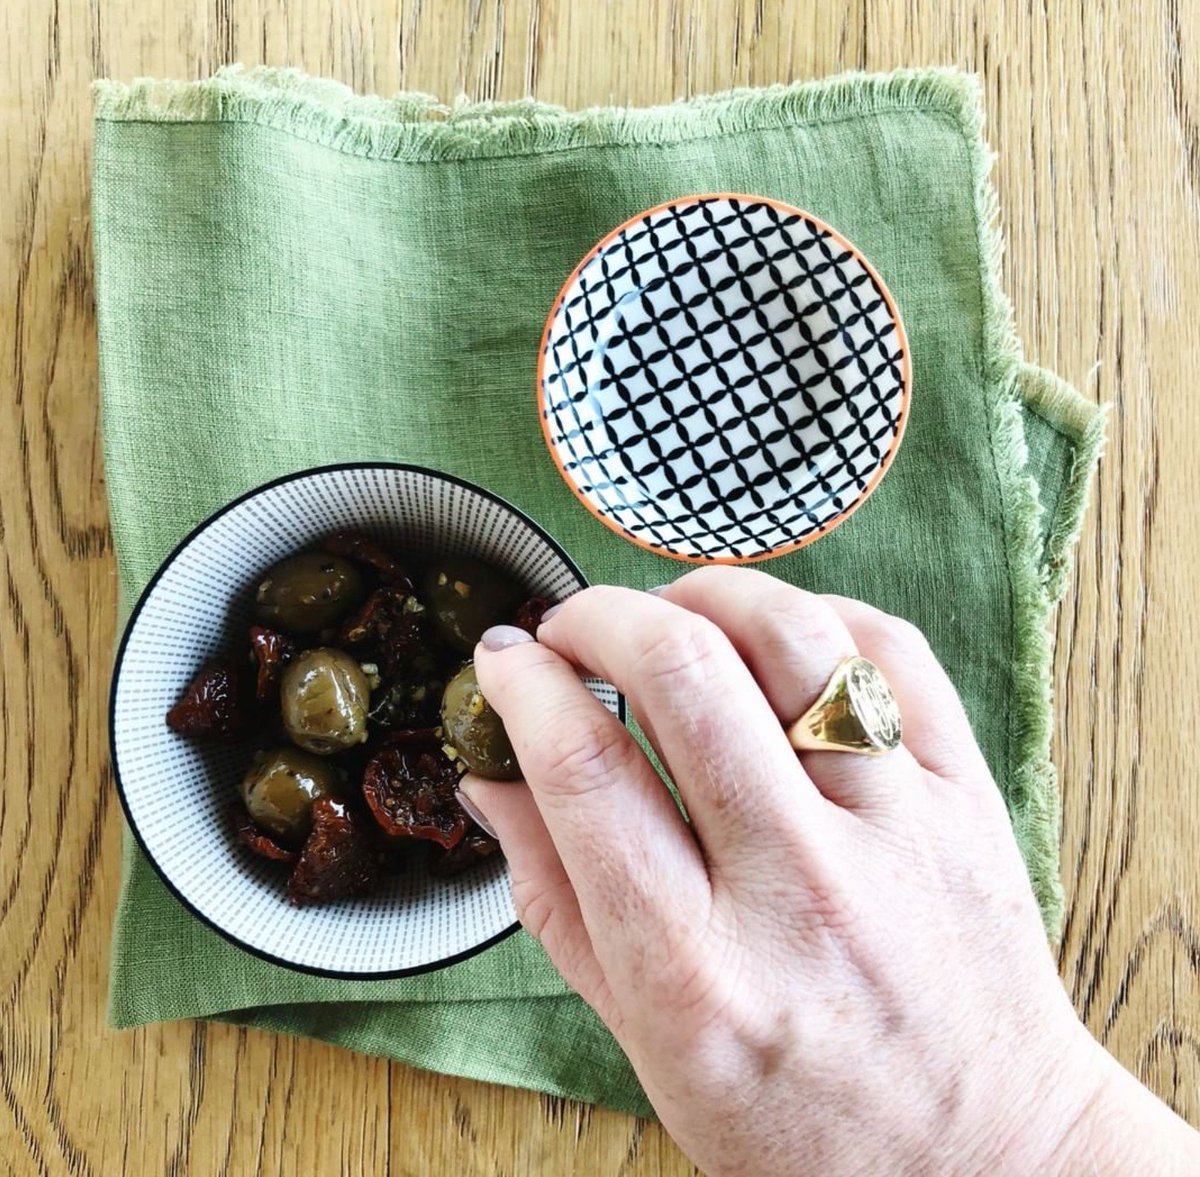 Pro tip: Olive Oil of the World sells the MOST divine marinated Castelvetrano olives (with garlic, sundried tomatoes, herbs, olive oil). They make the perfect snack alongside a glass of wine. Then there's Quinn that sells the most adorable adorable bowls and napkins! #treatyoself